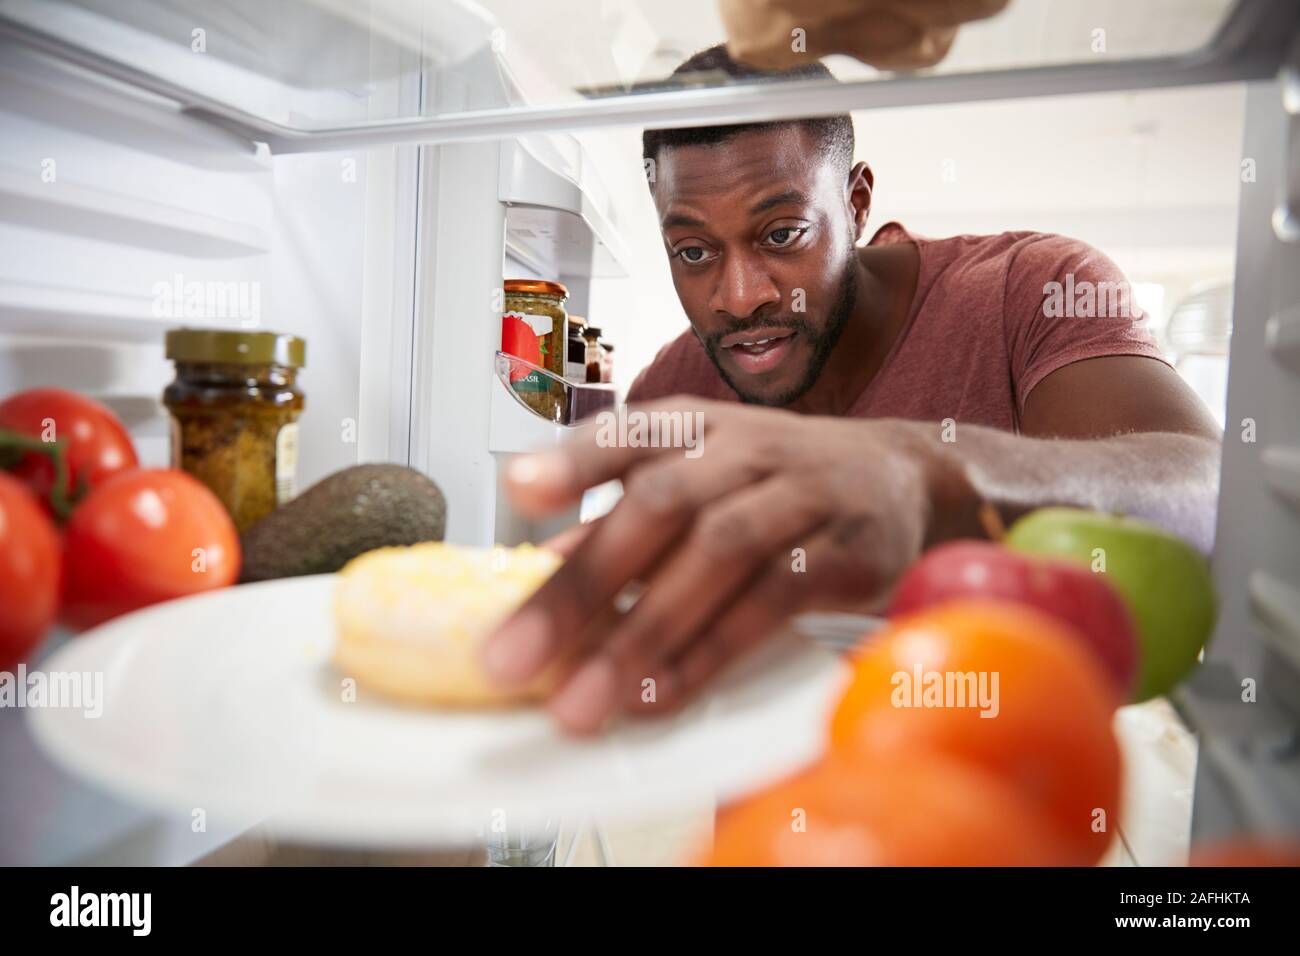 View Looking Out From Inside Of Refrigerator As Man Opens Door And Reaches For Unhealthy Donut Stock Photo